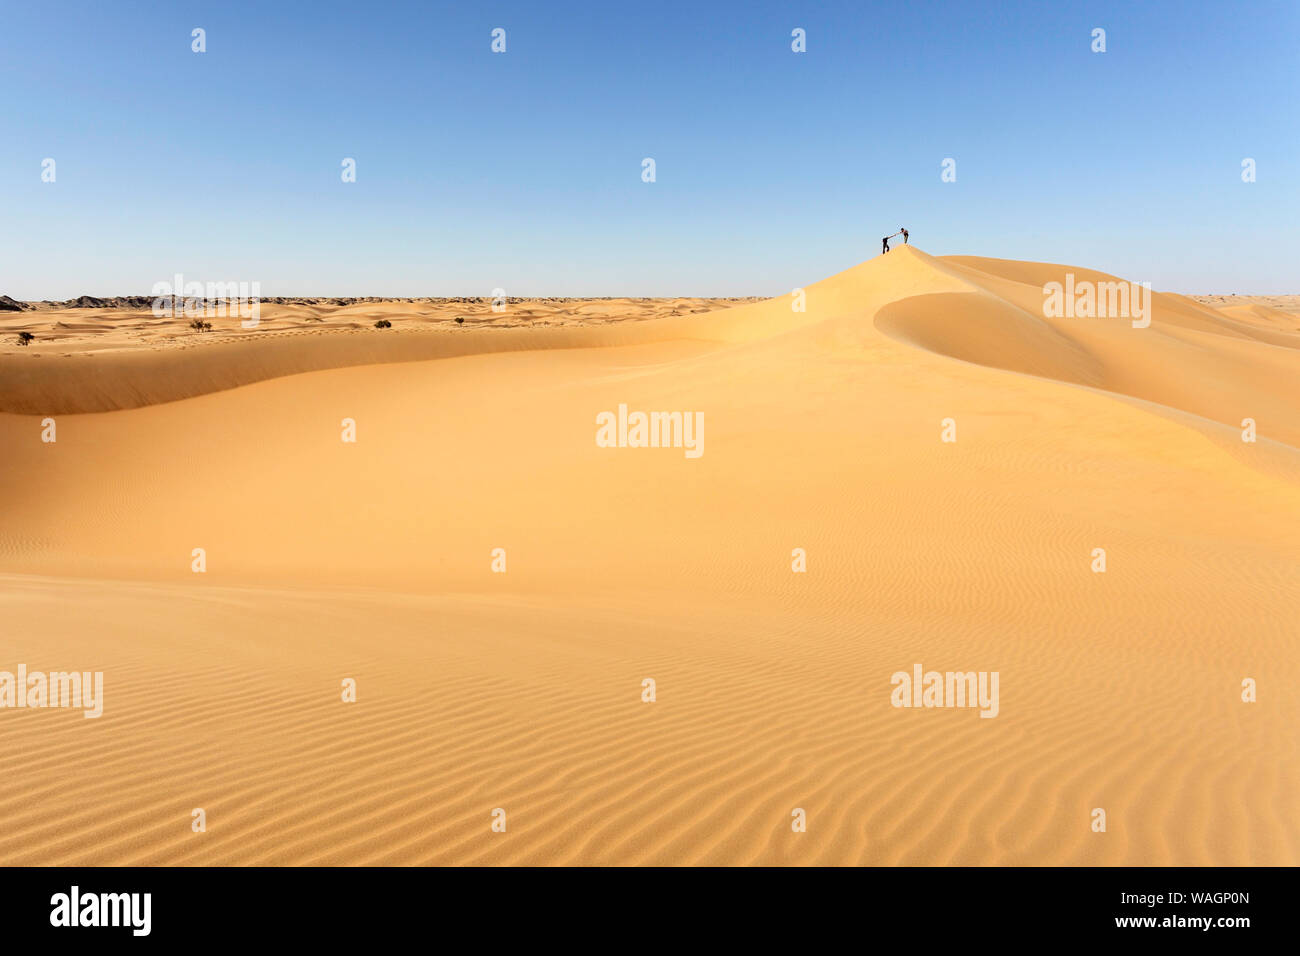 Two man helping each other to climb on dunes in Cinnamon Desert, desert between Mahout and Duqm, Oman Stock Photo